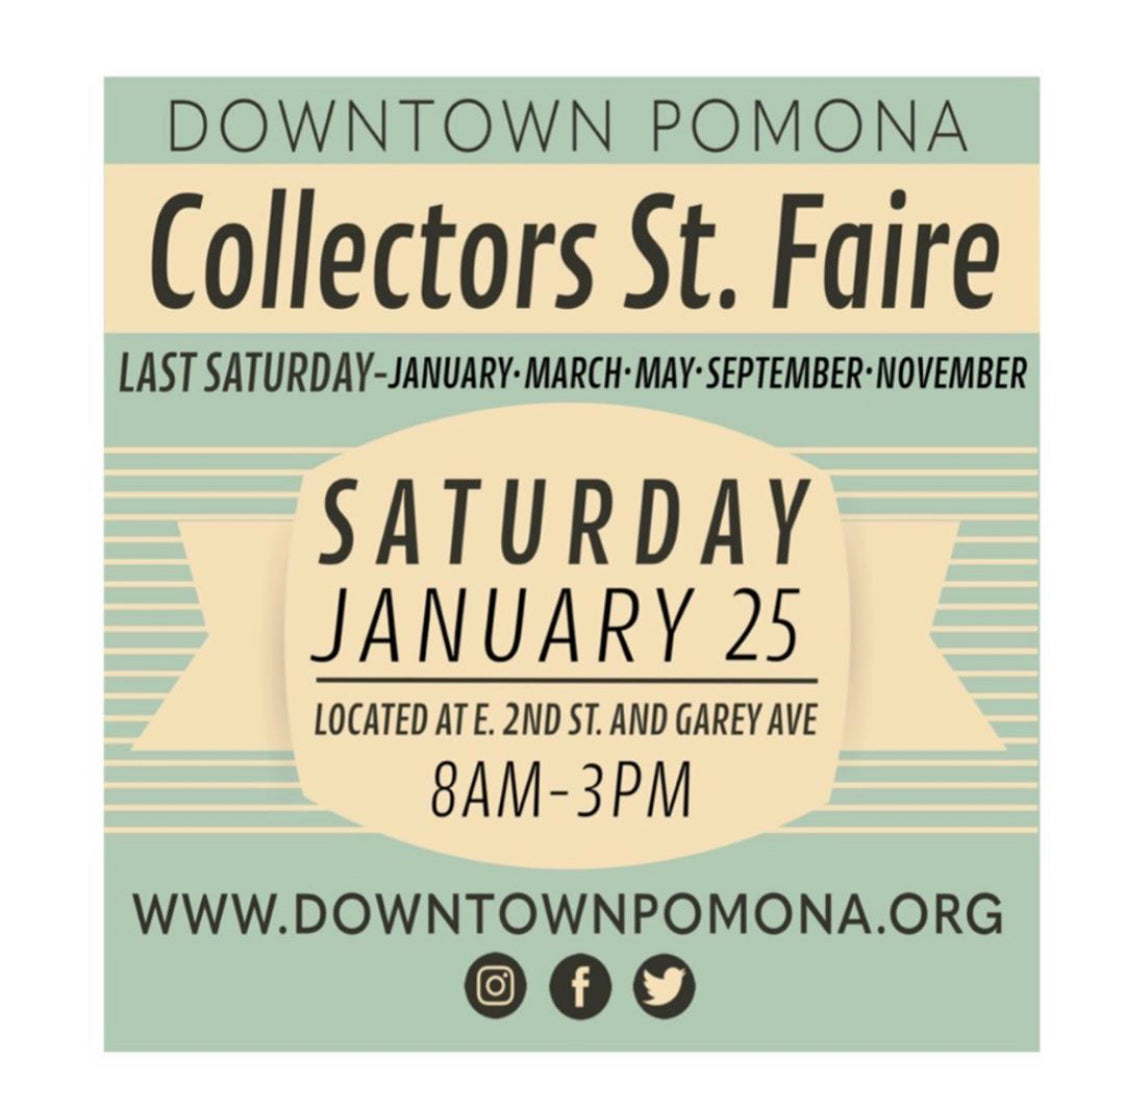 Collectors Street Faire This Saturday